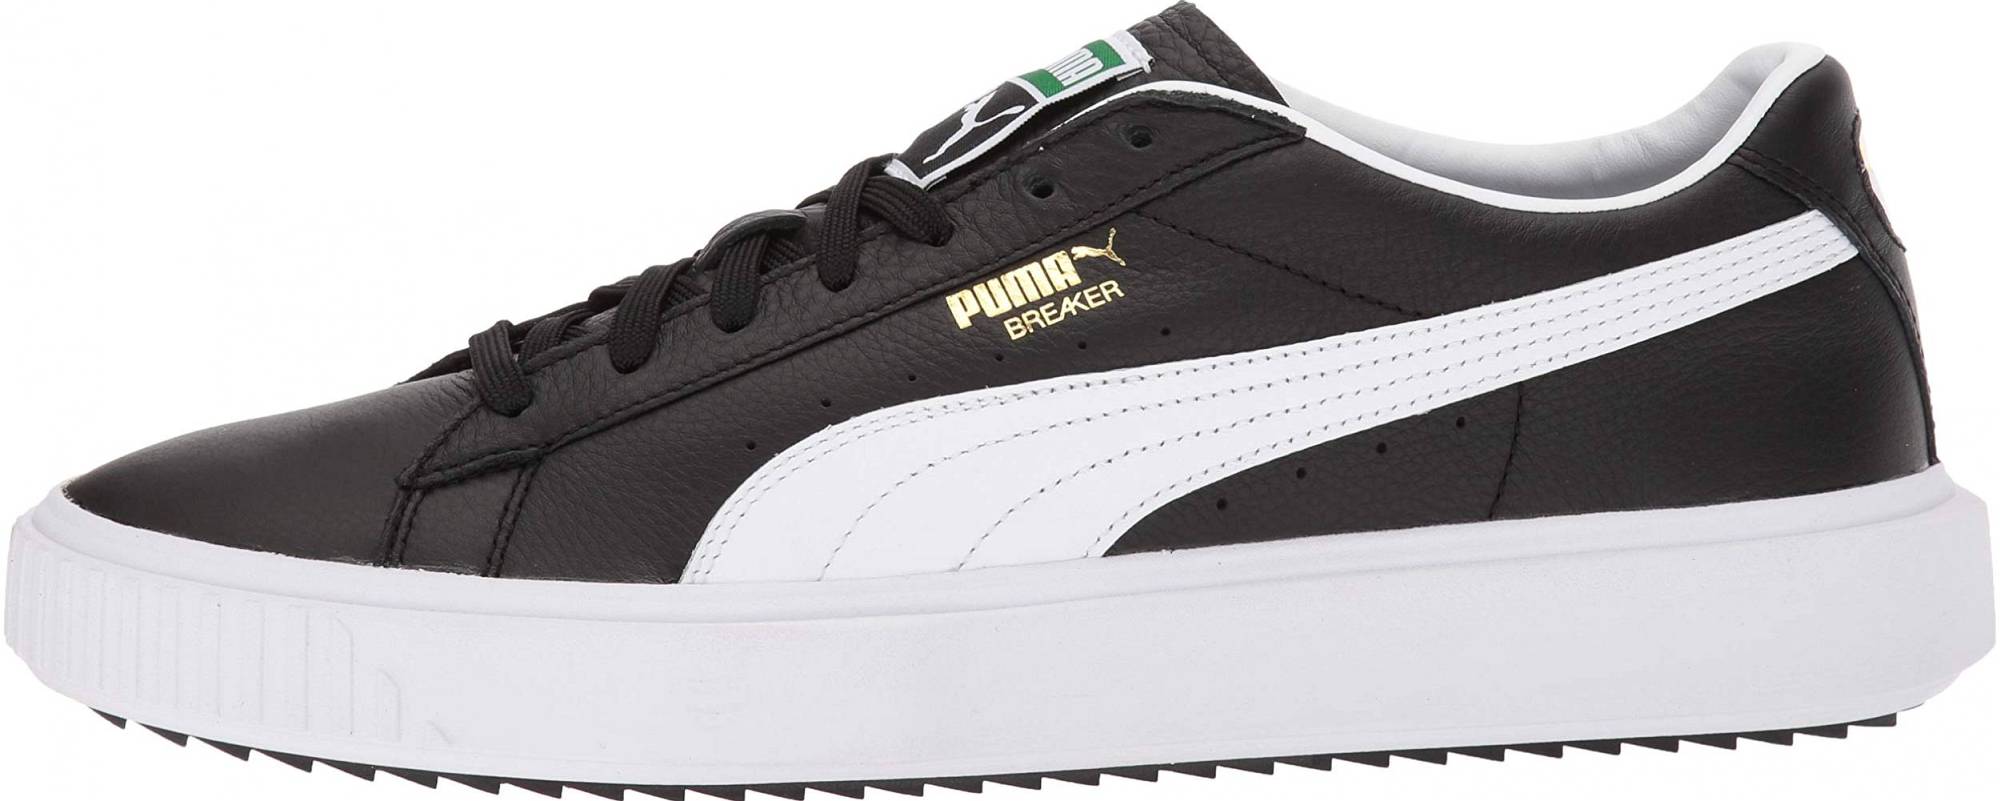 Puma Breaker Leather – Shoes Reviews & Reasons To Buy